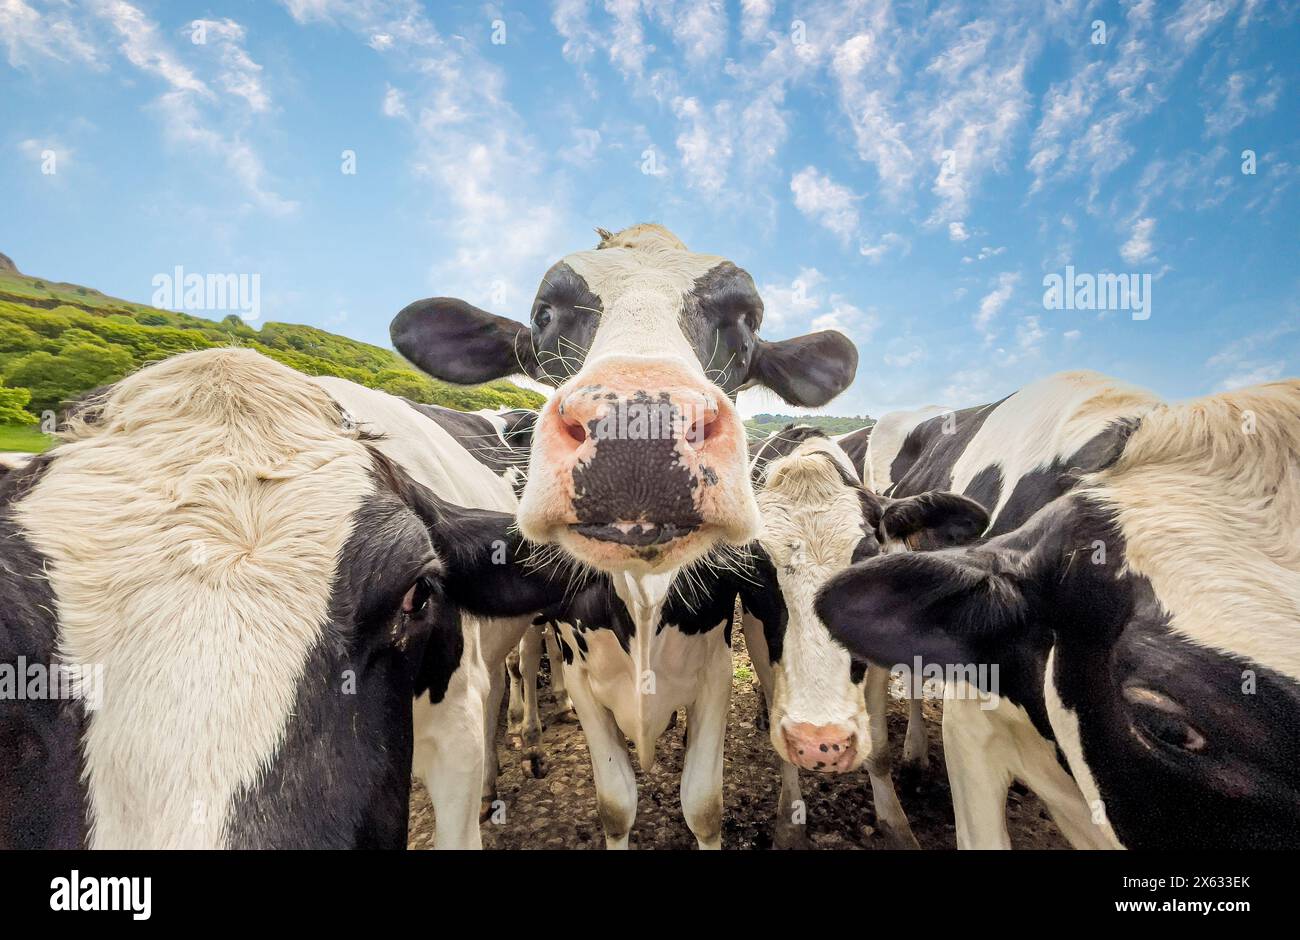 Wide-angle shot of curious black and white cows looking directly into the camera, seen against a blue sky. Stock Photo